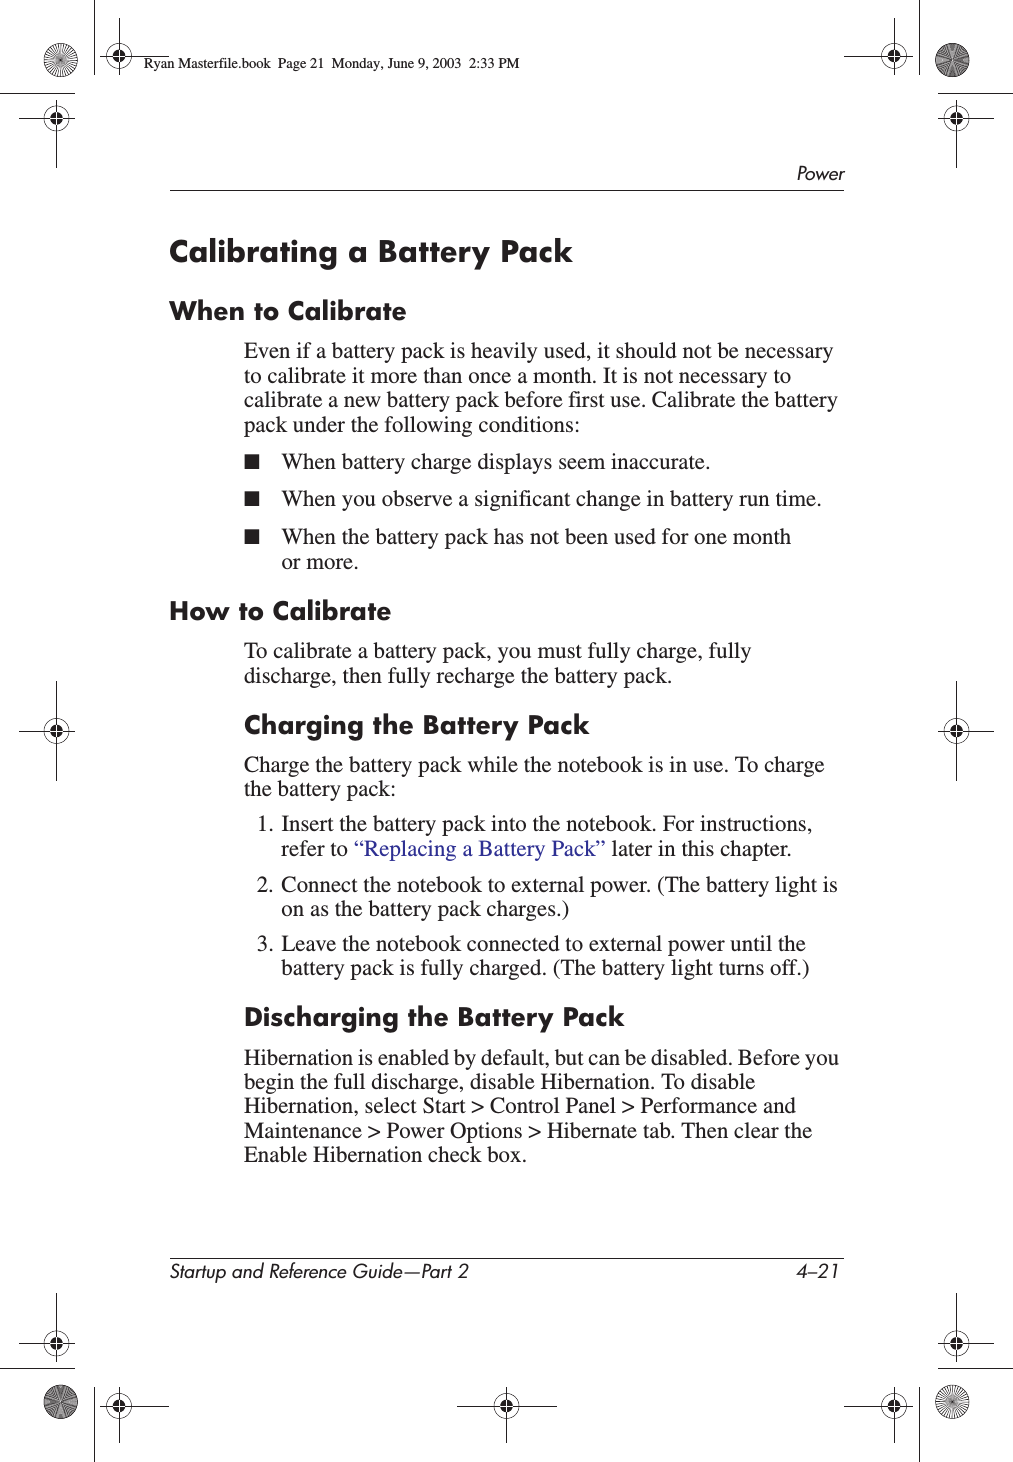 PowerStartup and Reference Guide—Part 2 4–21Calibrating a Battery PackWhen to CalibrateEven if a battery pack is heavily used, it should not be necessary to calibrate it more than once a month. It is not necessary to calibrate a new battery pack before first use. Calibrate the battery pack under the following conditions:■When battery charge displays seem inaccurate.■When you observe a significant change in battery run time.■When the battery pack has not been used for one month or more.How to CalibrateTo calibrate a battery pack, you must fully charge, fully discharge, then fully recharge the battery pack.Charging the Battery PackCharge the battery pack while the notebook is in use. To charge the battery pack:1. Insert the battery pack into the notebook. For instructions, refer to “Replacing a Battery Pack” later in this chapter.2. Connect the notebook to external power. (The battery light is on as the battery pack charges.)3. Leave the notebook connected to external power until the battery pack is fully charged. (The battery light turns off.)Discharging the Battery PackHibernation is enabled by default, but can be disabled. Before you begin the full discharge, disable Hibernation. To disable Hibernation, select Start &gt; Control Panel &gt; Performance and Maintenance &gt; Power Options &gt; Hibernate tab. Then clear the Enable Hibernation check box.Ryan Masterfile.book  Page 21  Monday, June 9, 2003  2:33 PM